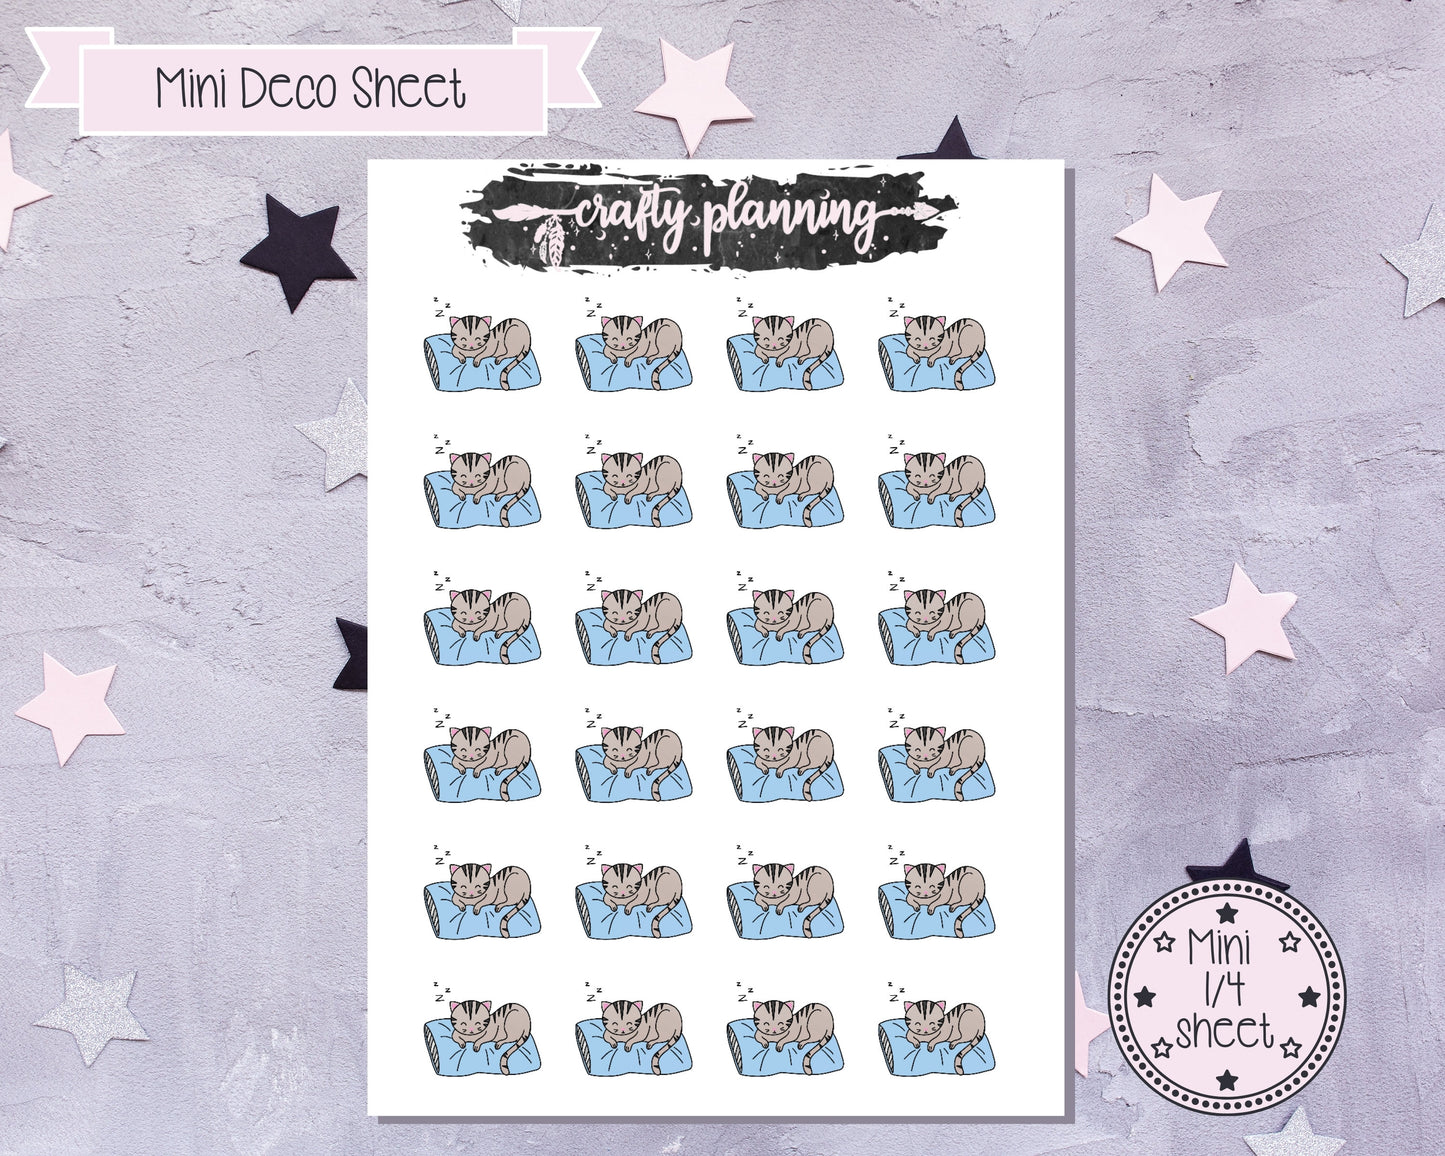 Crafty Cat Stickers, Crafty Cat Sleeping, Lazy Day Stickers, Duvet Day Stickers, Character Stickers, Nap Time Stickers, Planner Stickers